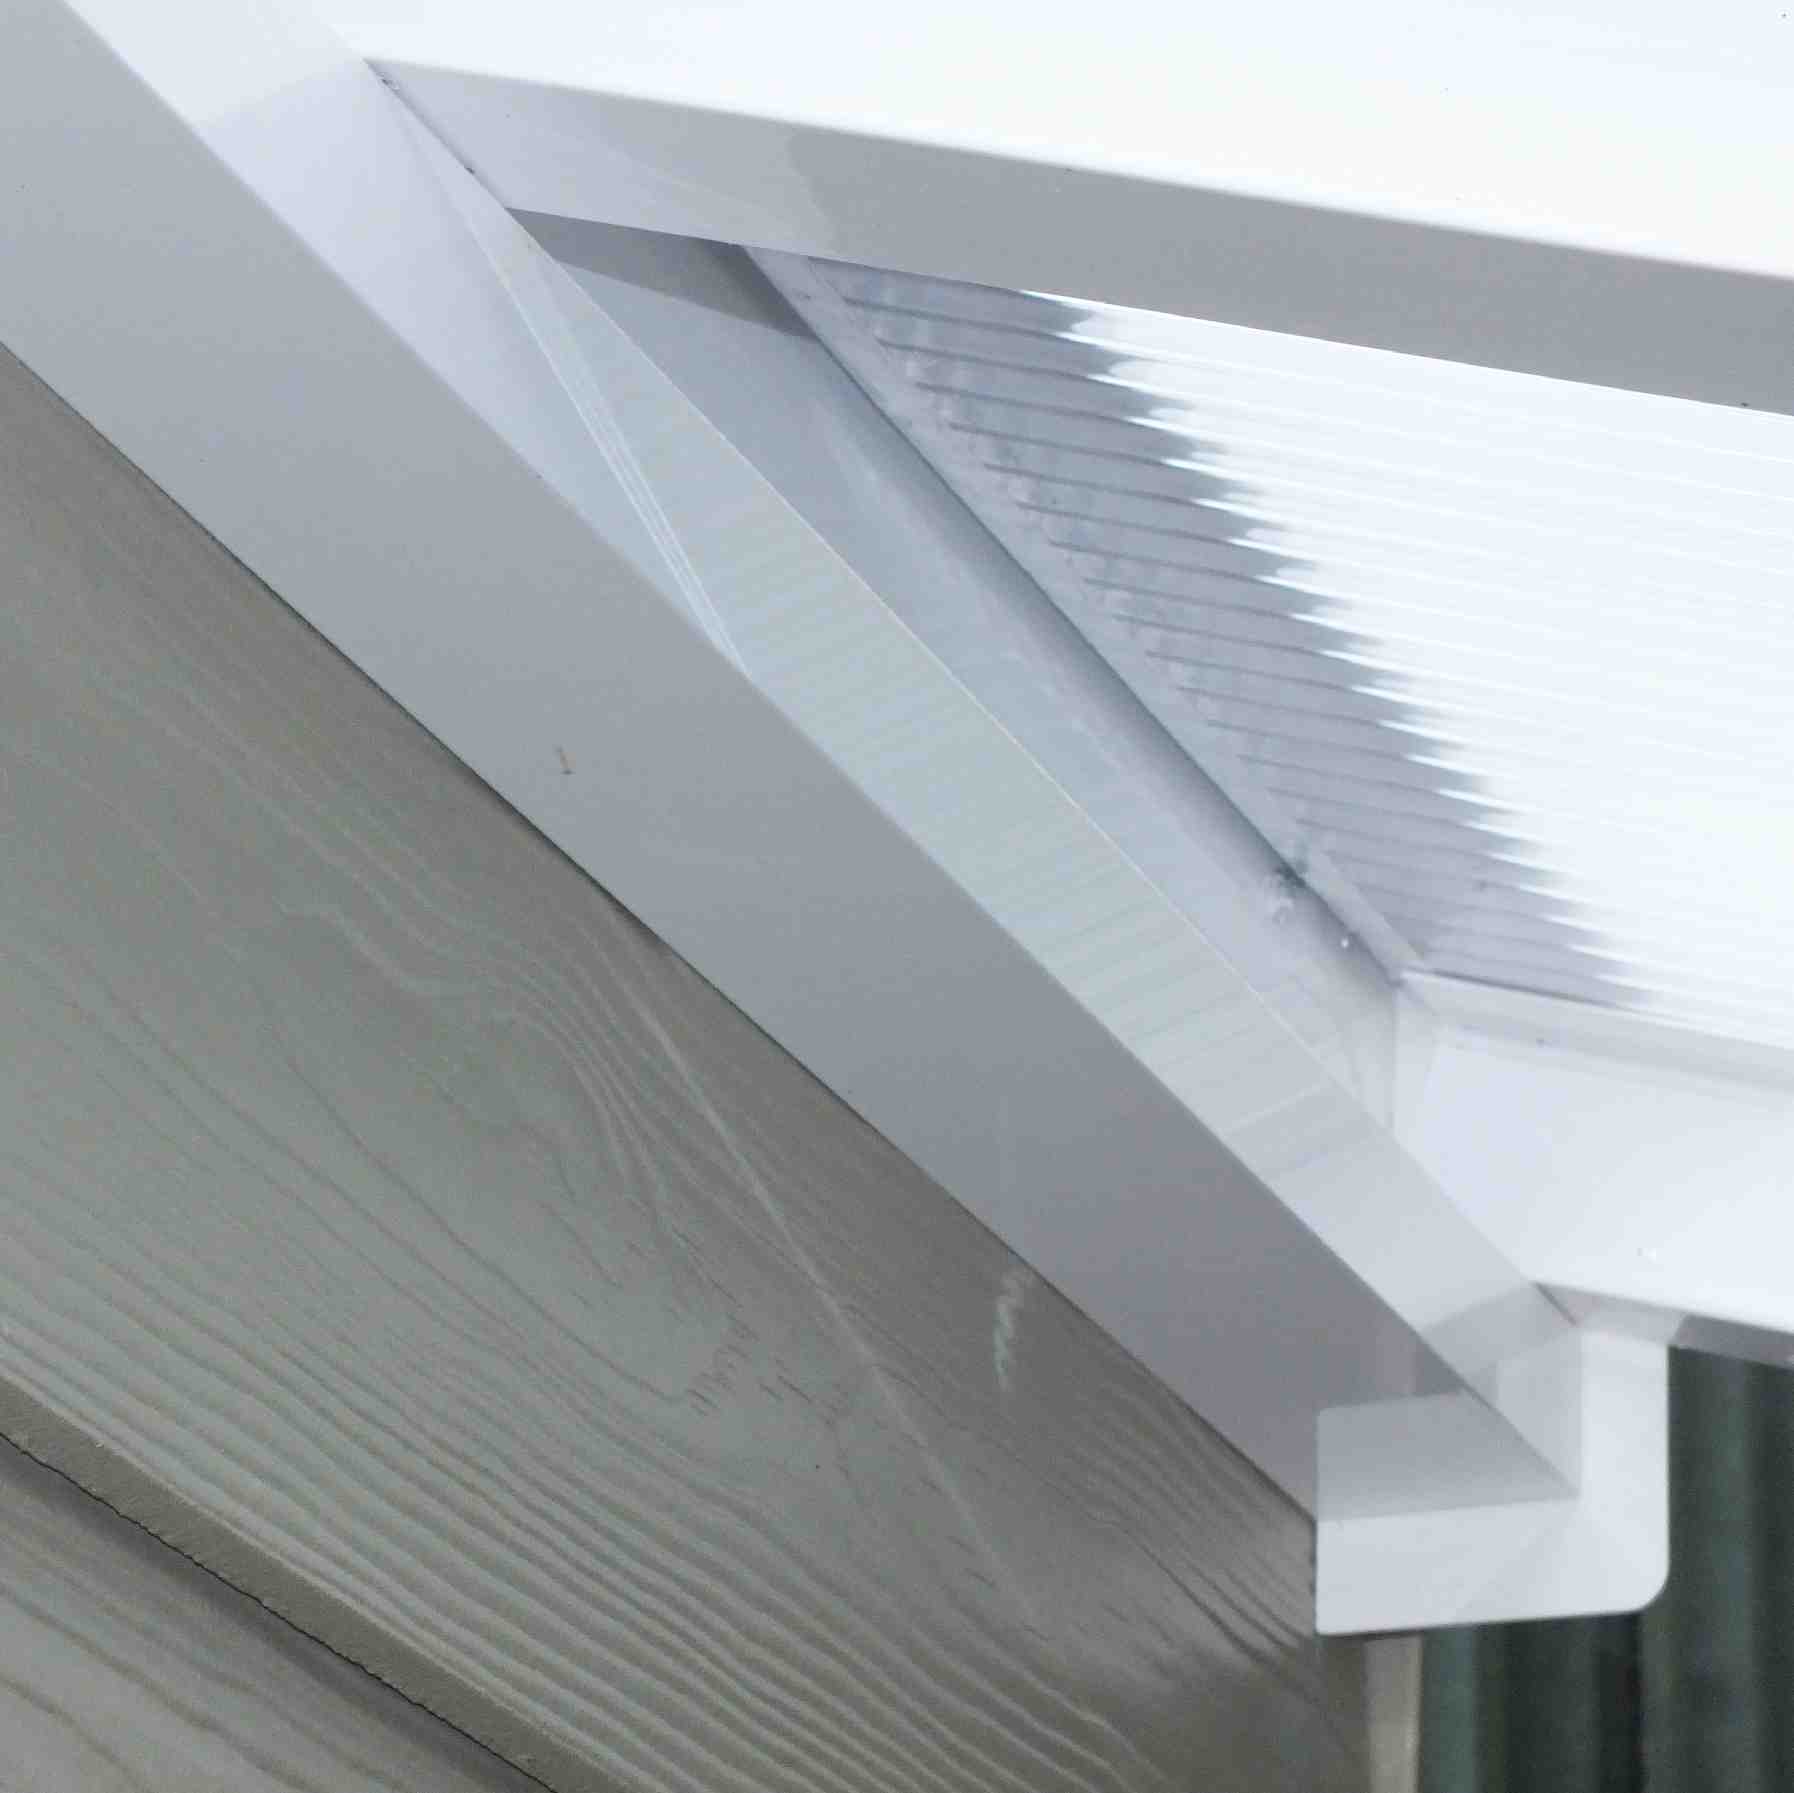 Great deals on Omega Verandah White with 16mm Polycarbonate Glazing - 6.0m (W) x 4.0m (P), (3) Supporting Posts